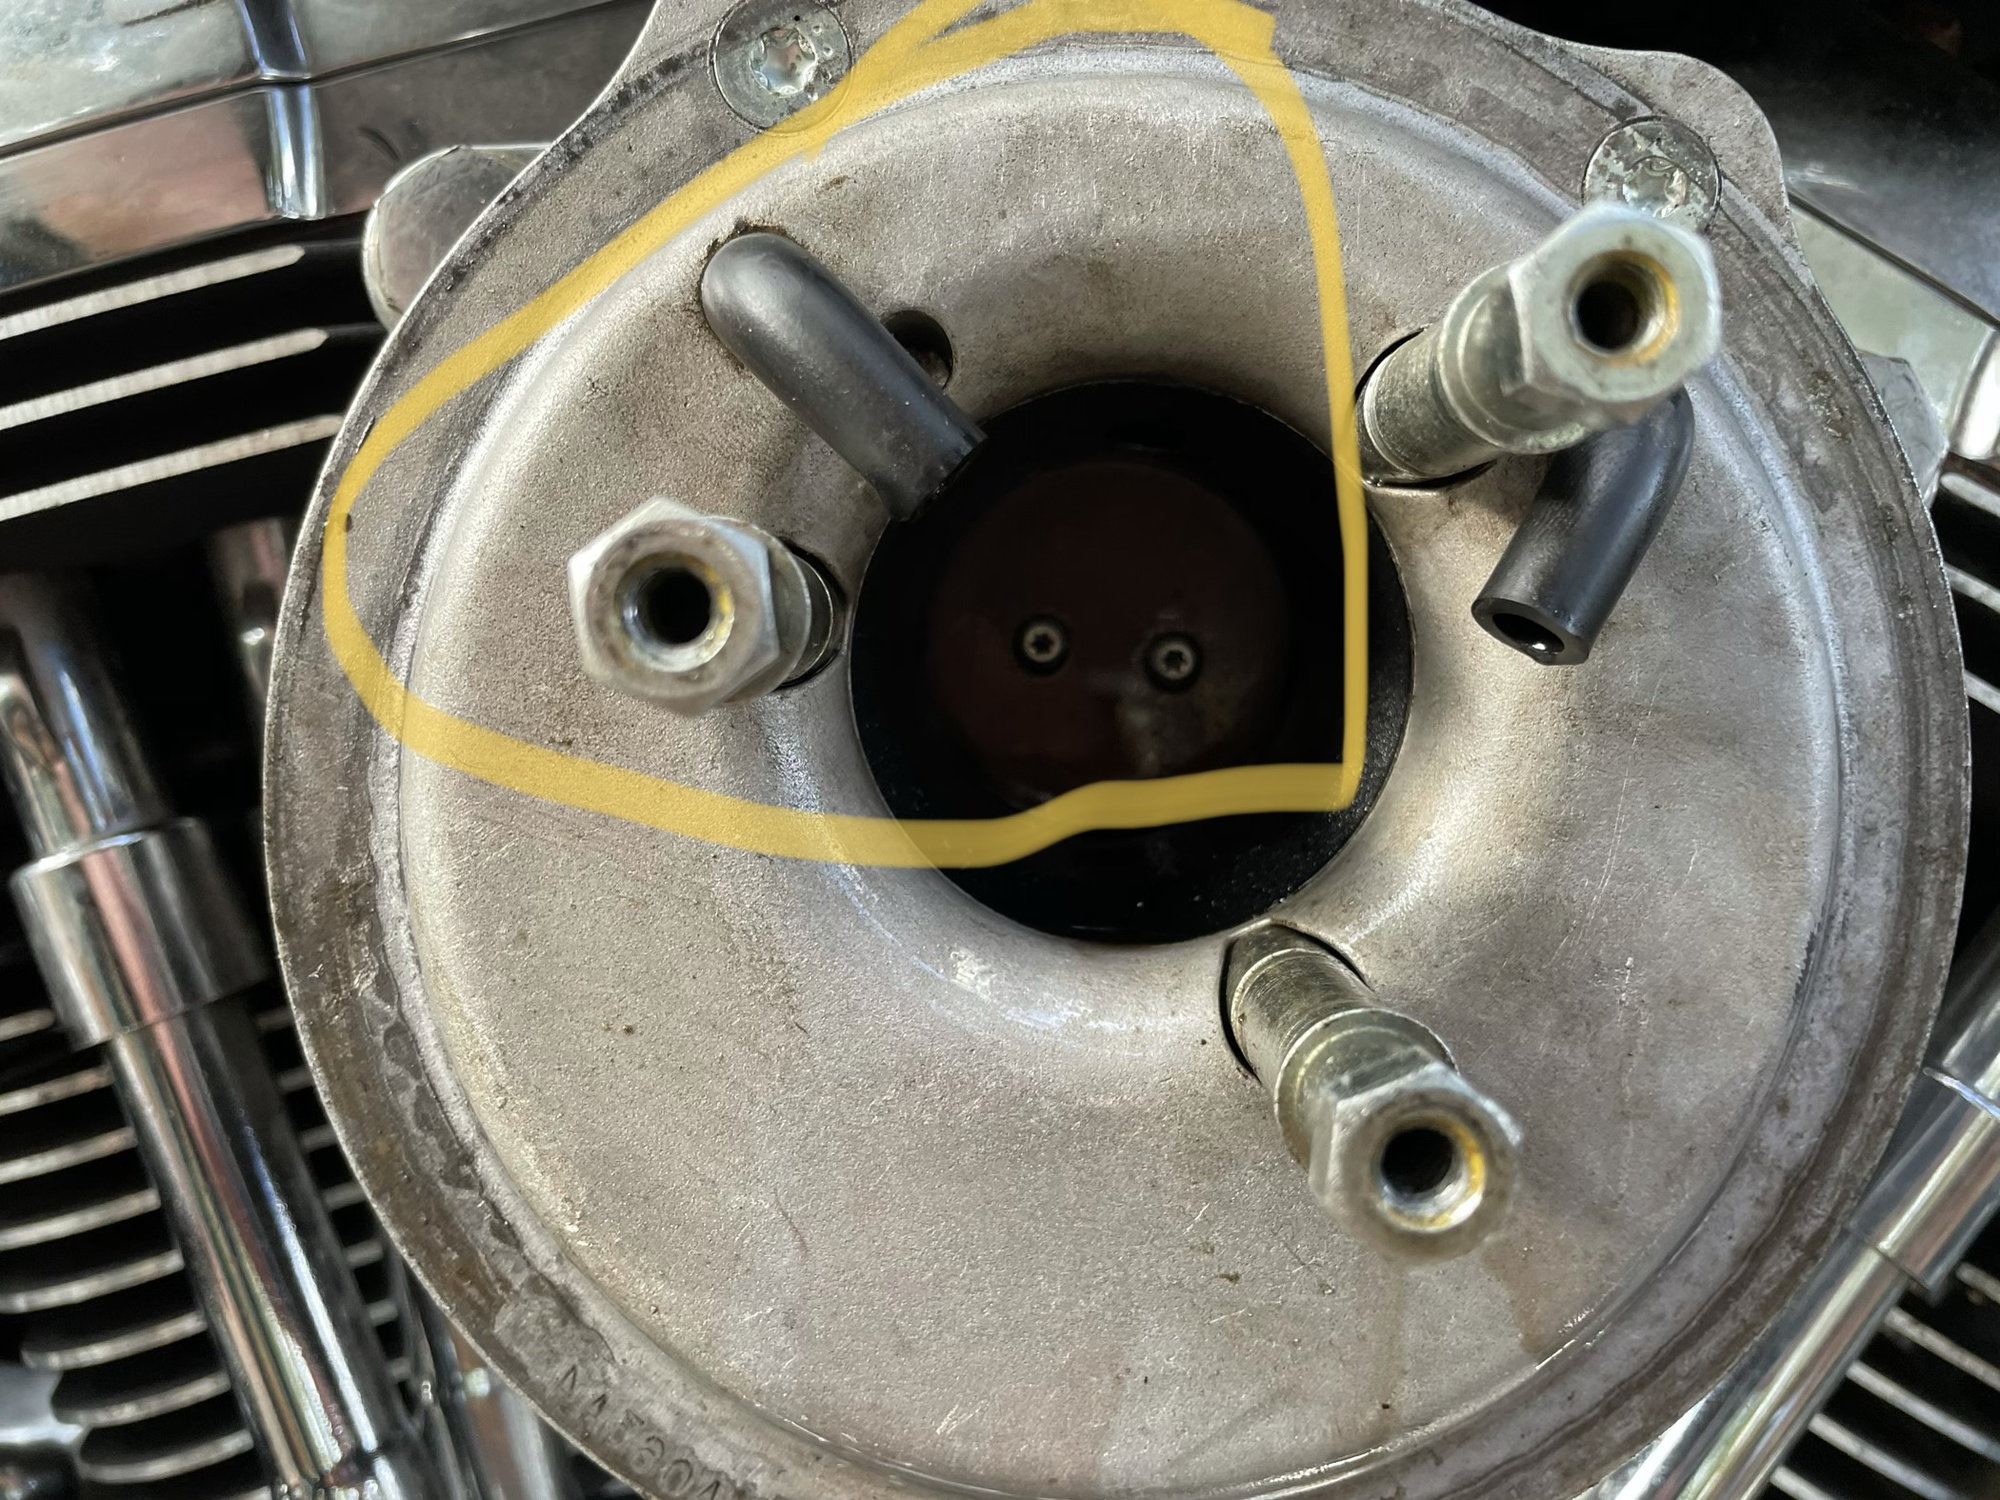 Oil coming up through breather tubes - Harley Davidson Forums